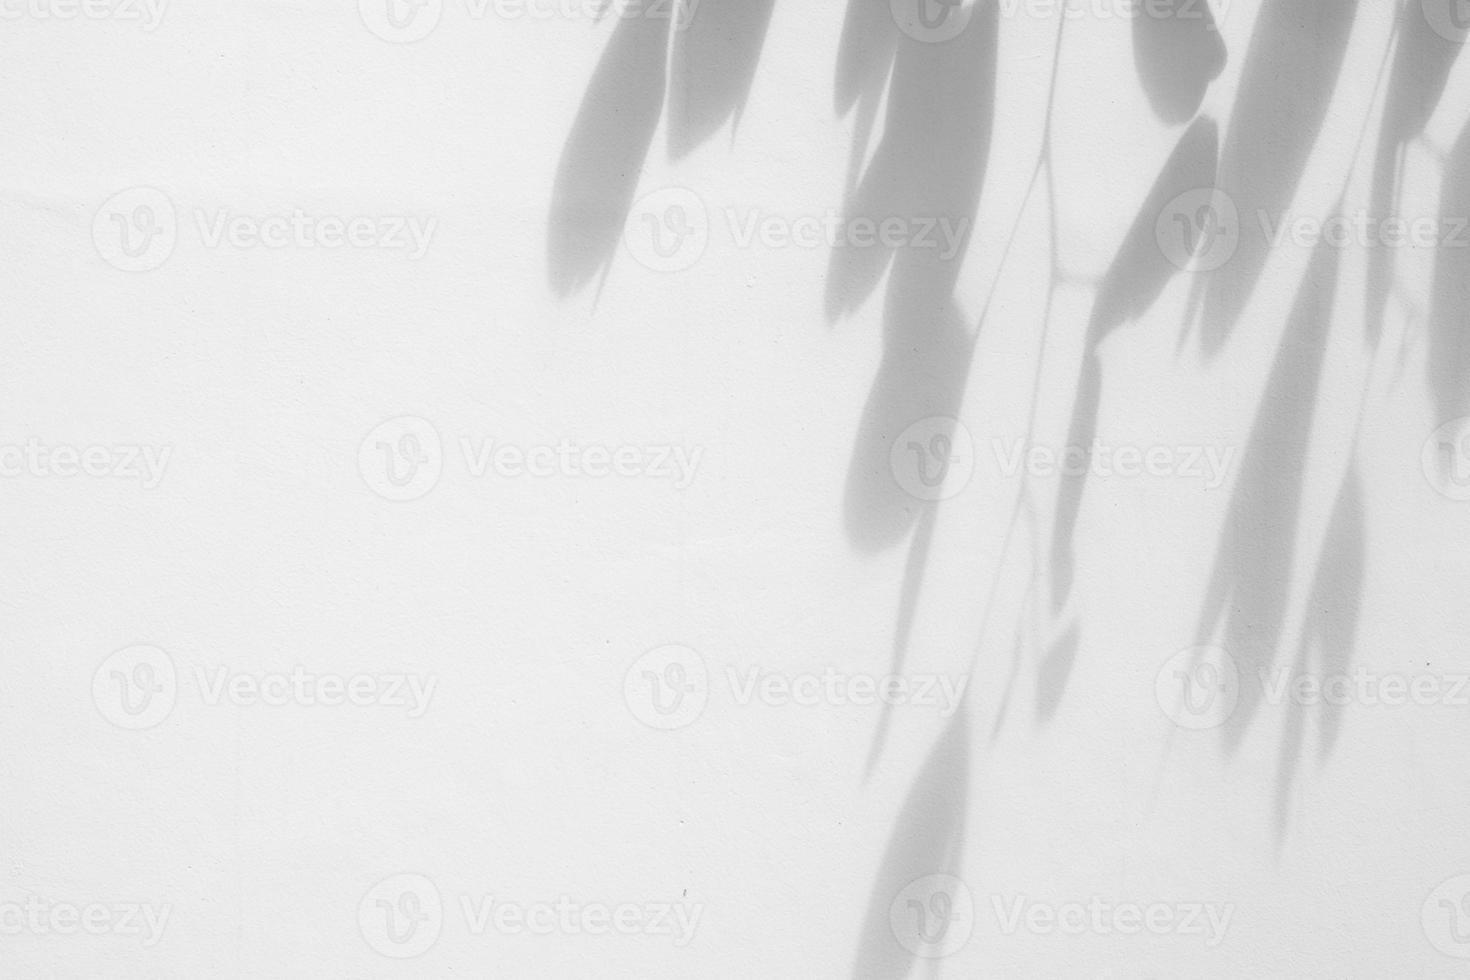 Abstract natural tree leaves shadow on white wall background photo